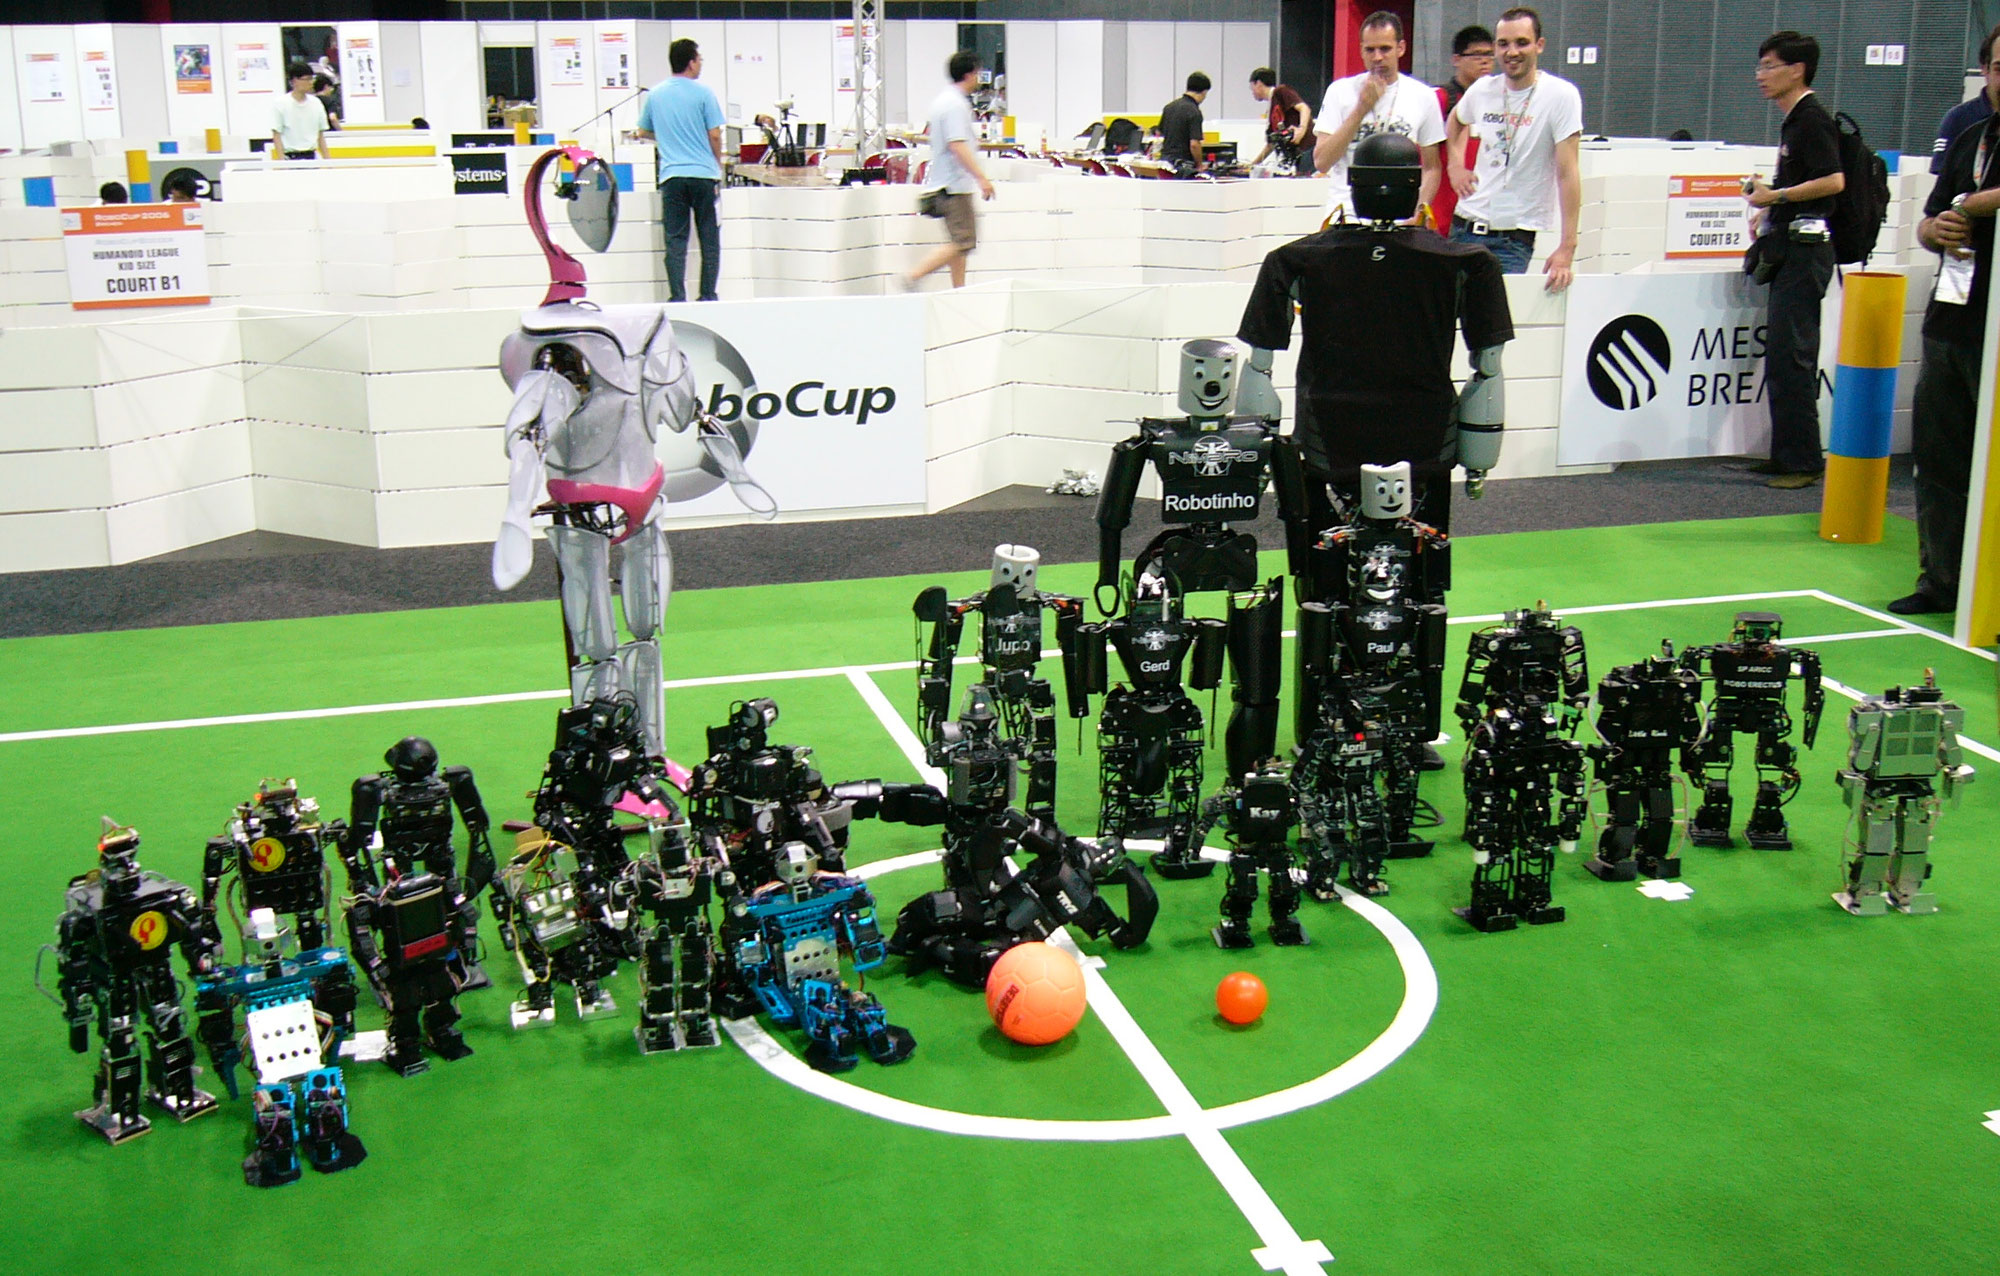 Welcome to the International Robot Football Cup!